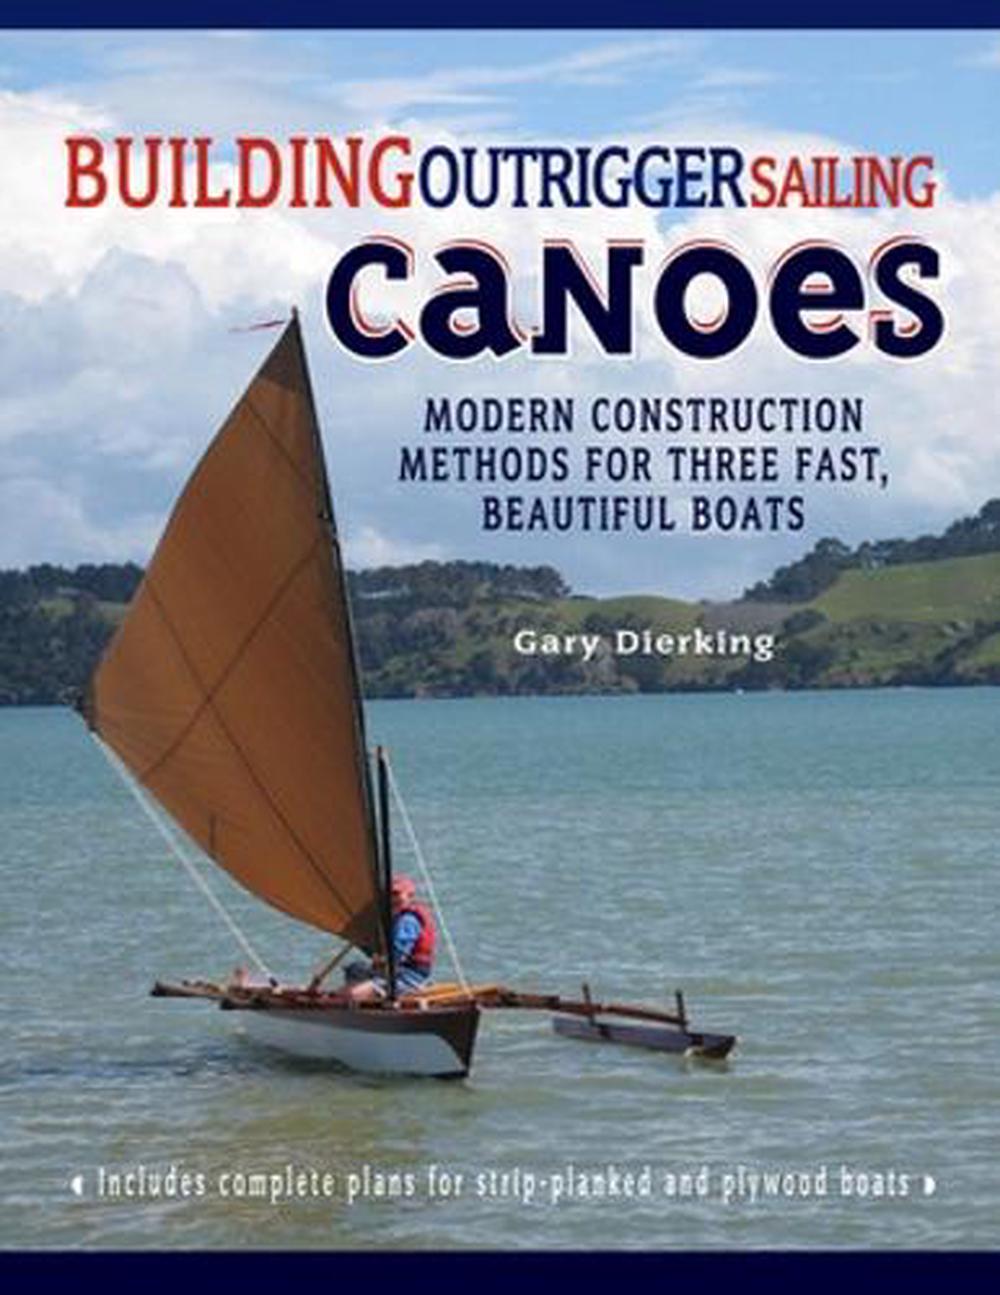 Building Outrigger Sailing Canoes: Modern Construction ...